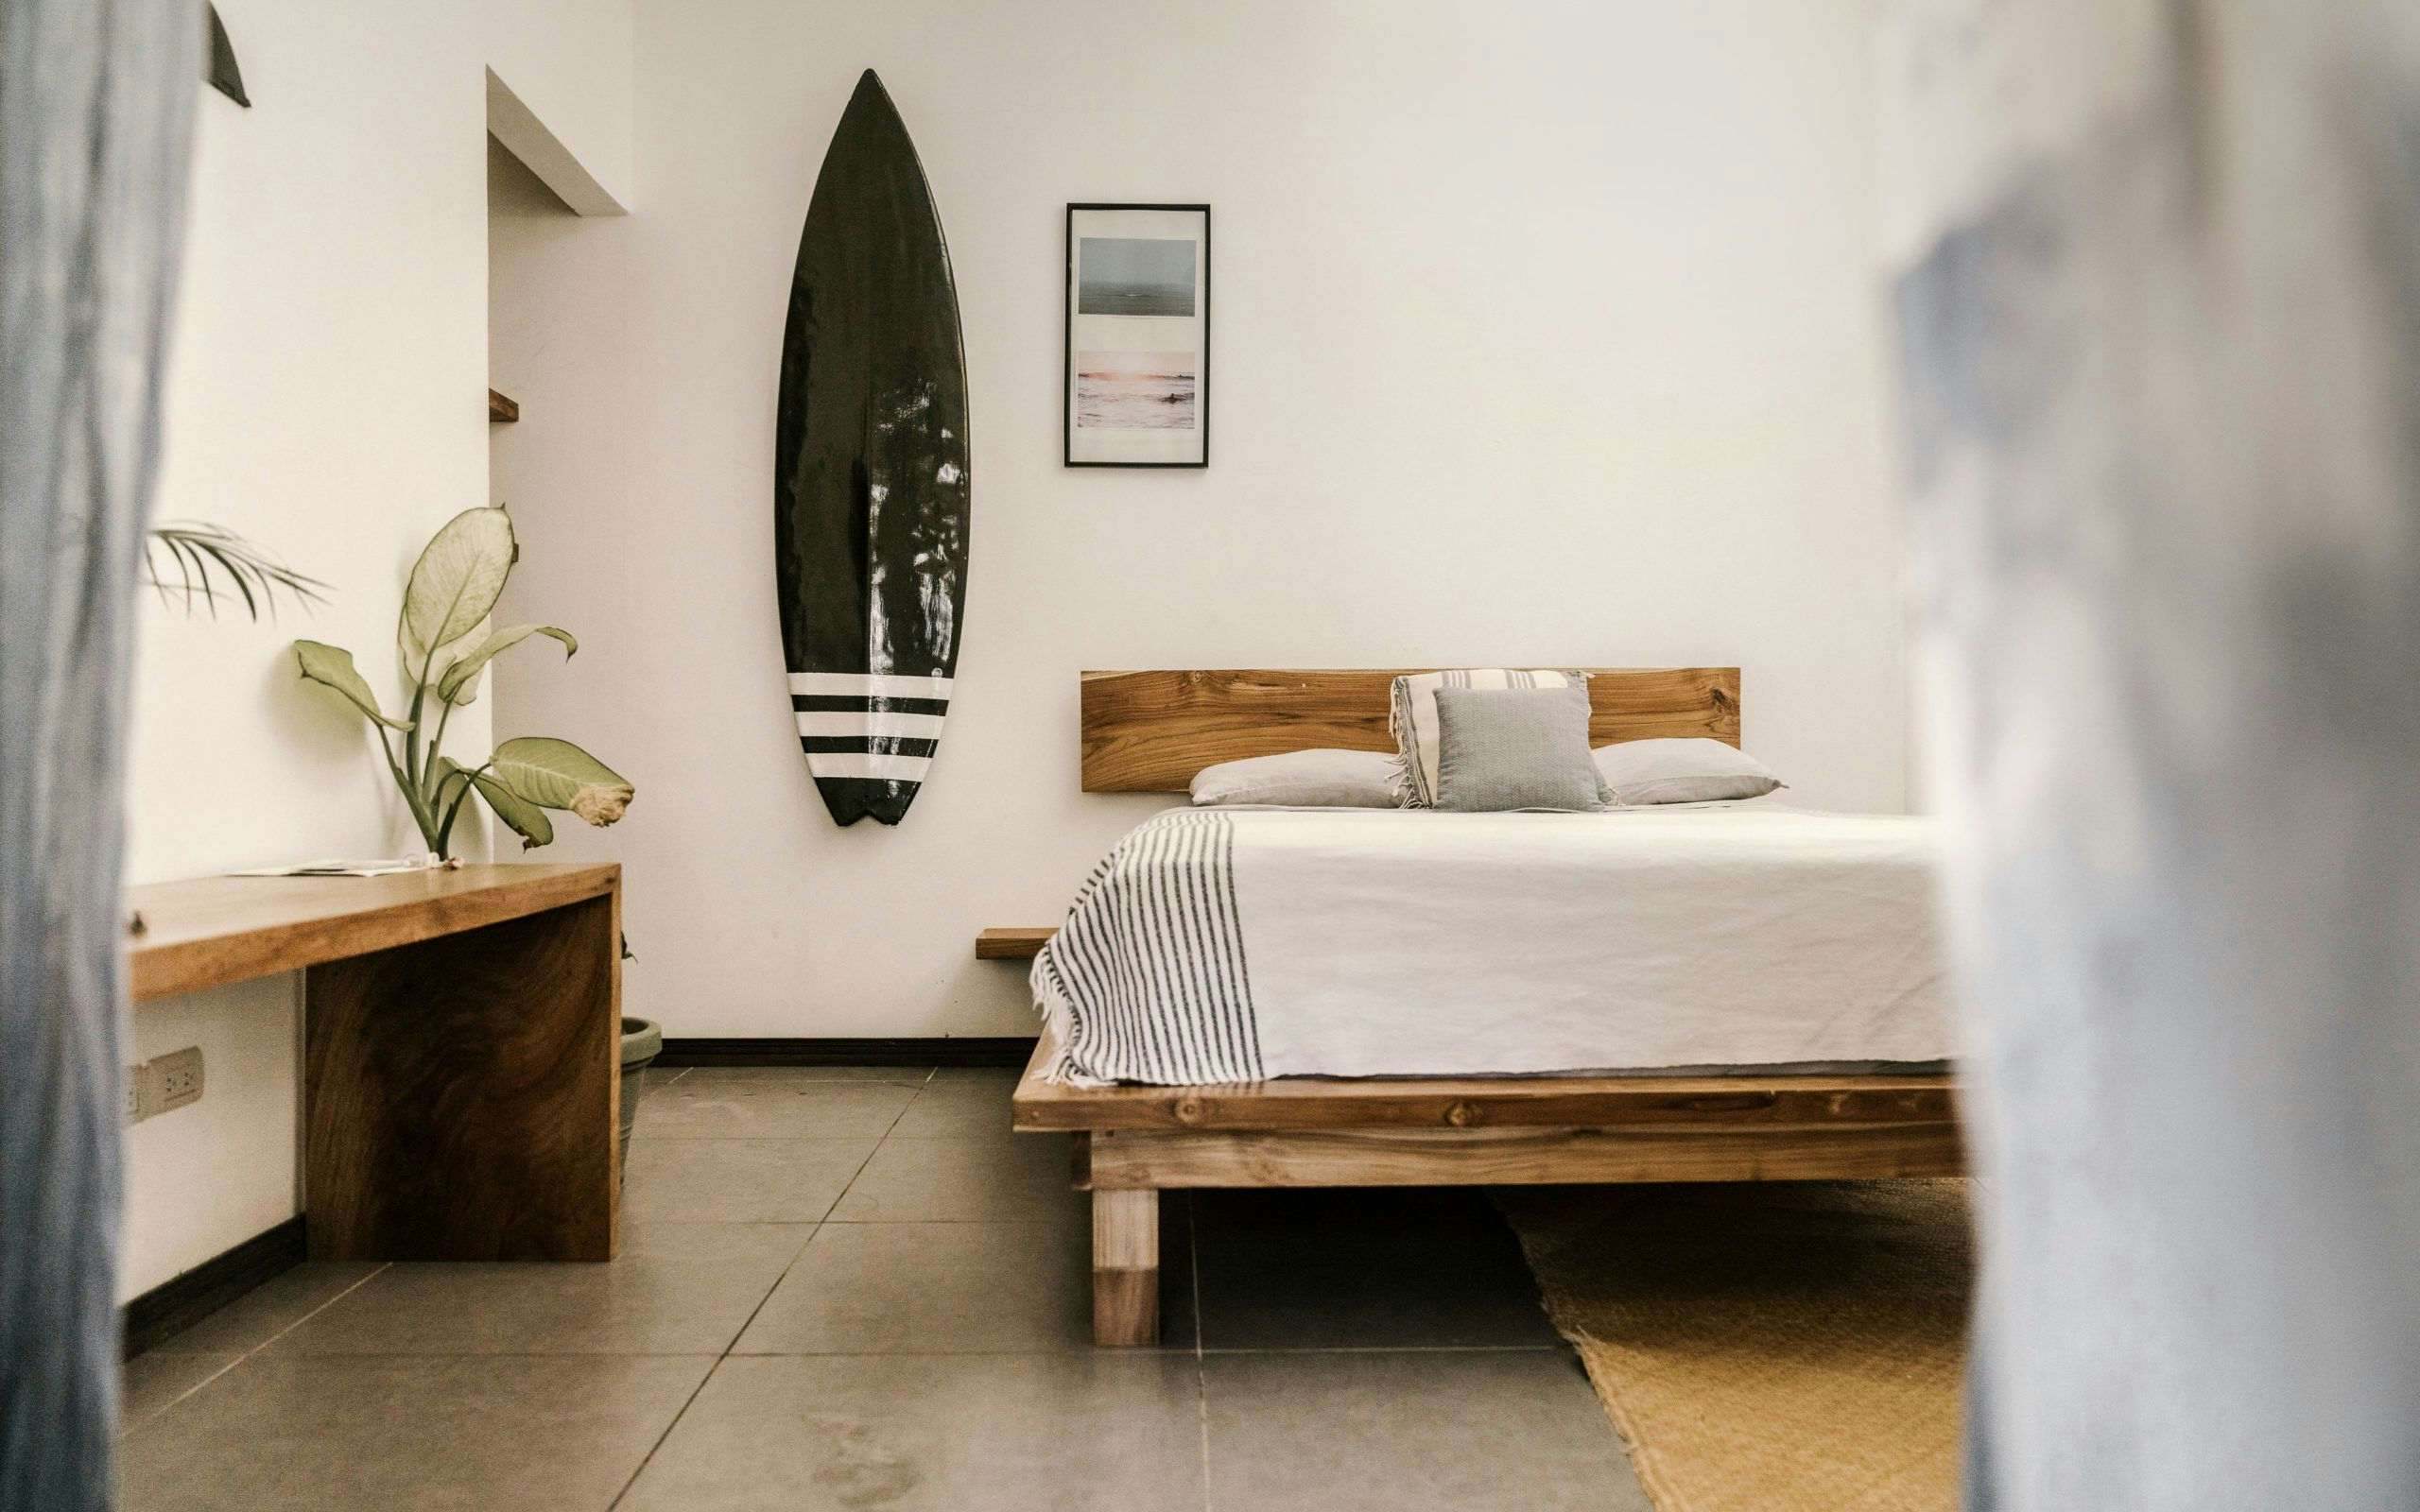 Private Room & Surf package